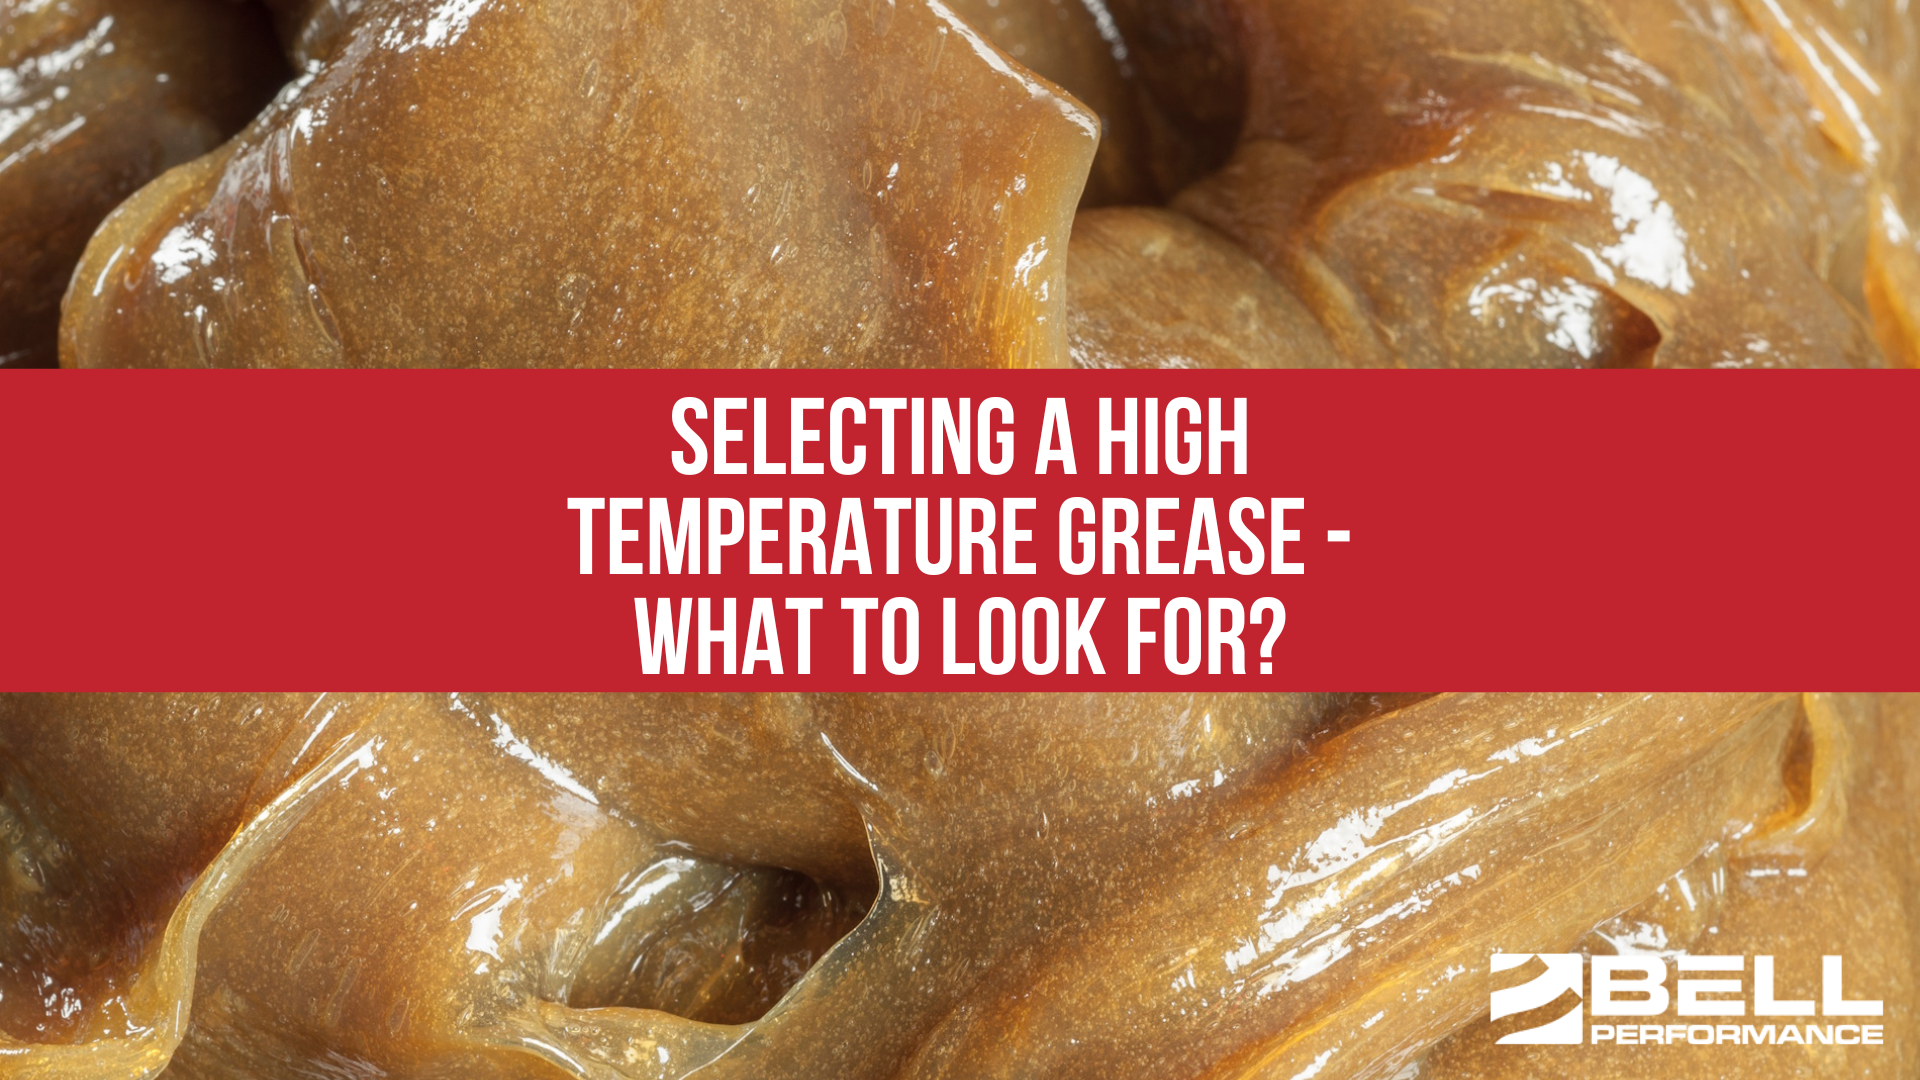 Selecting a High Temperature Grease - What to Look for?